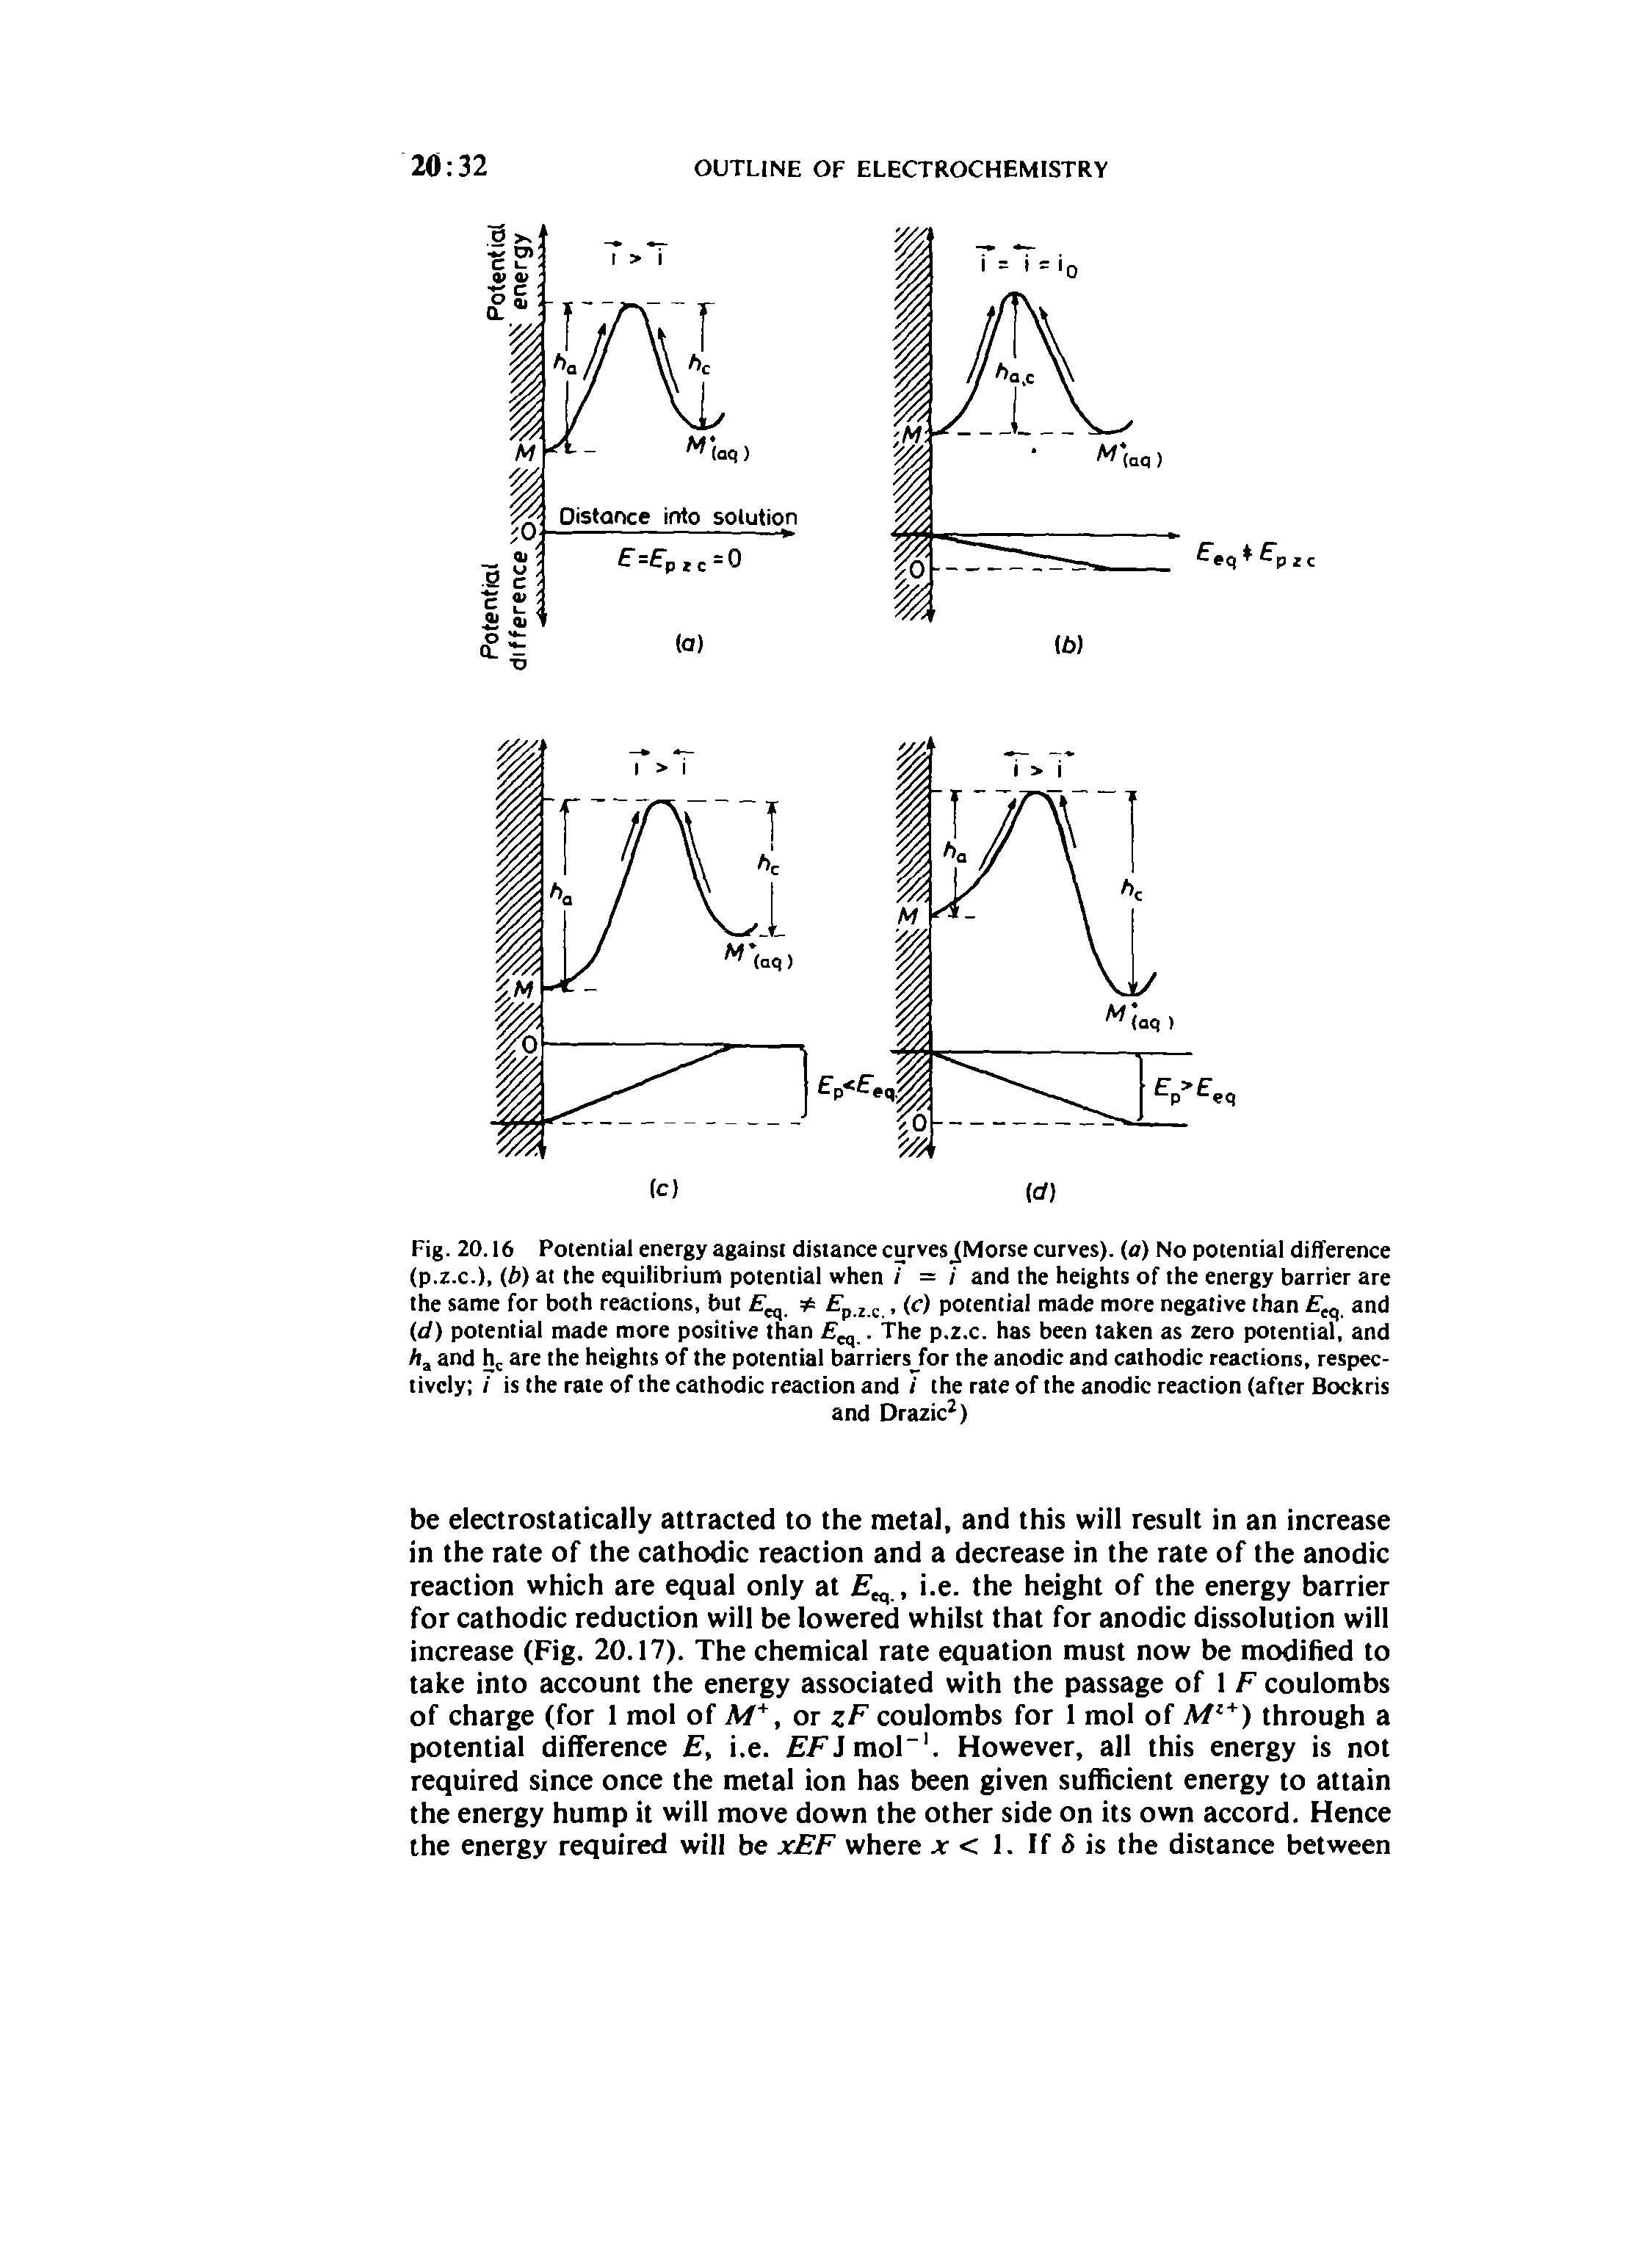 Fig. 20.16 Potential energy against distance curves Morse curves), (a) No potential dilTerence (p.z.c.), (b) at the equilibrium potential when / = / and the heights of the energy barrier are the same for both reactions, but p.z.c W potential made more negative than E q and (d) potential made more positive than E. The p.z.c. has been taken as zero potential, and A, and h,. are the heights of the potential barriersj or the anodic and cathodic reactions, respectively / is the rate of the cathodic reaction and / the rate of the anodic reaction (after Bockris...